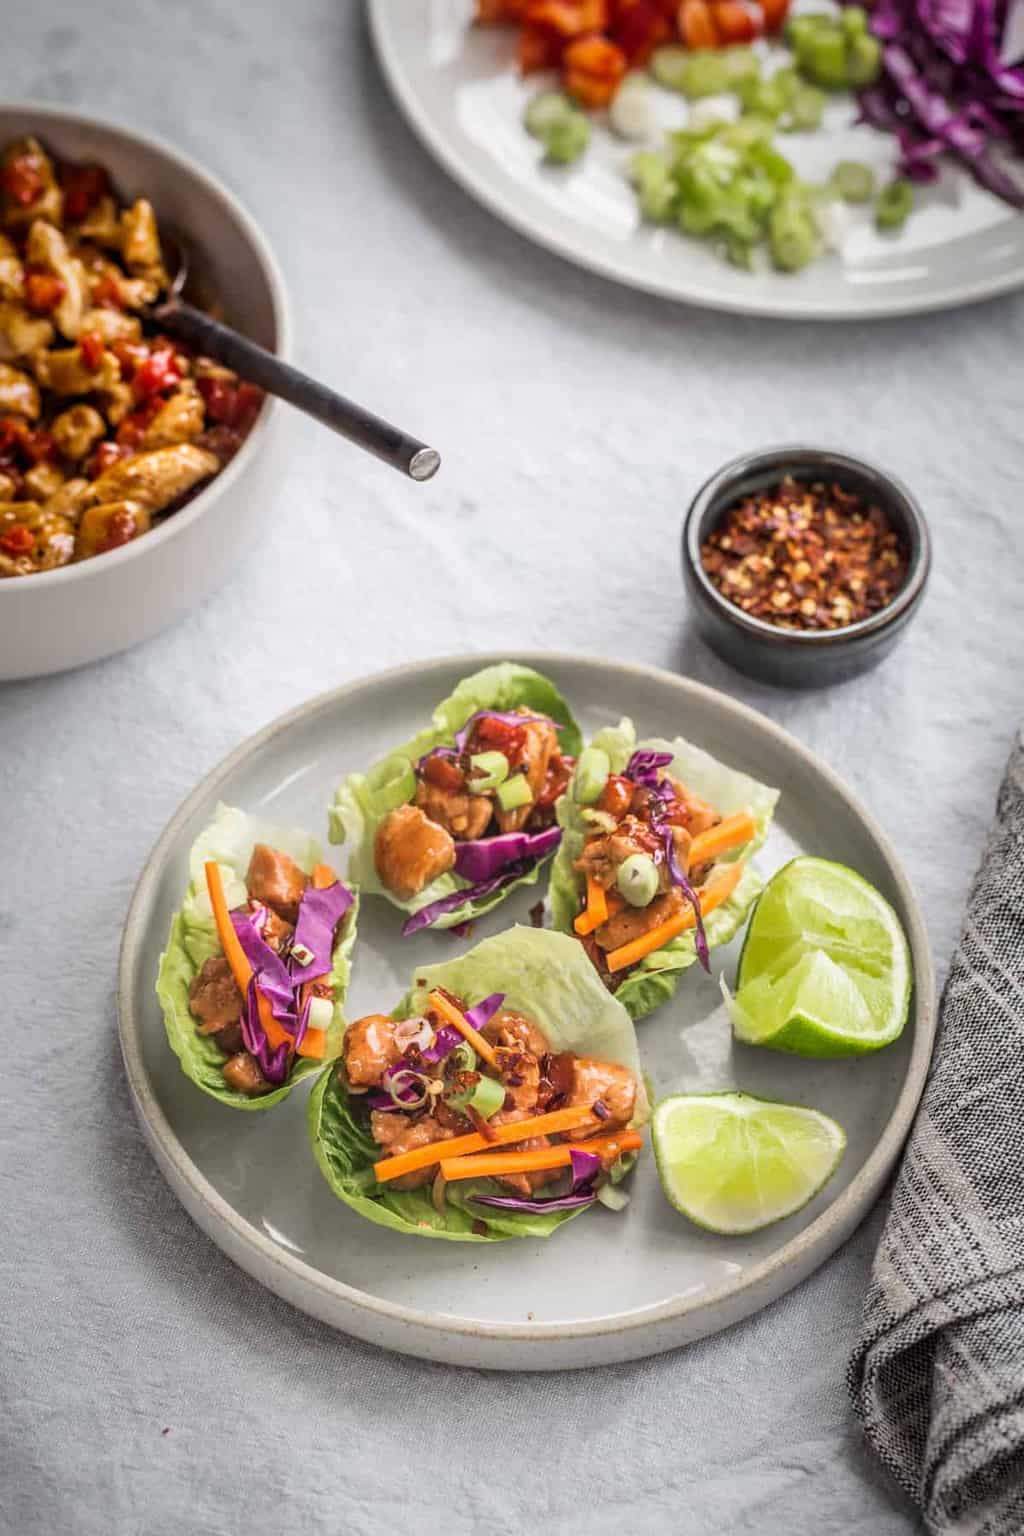 These Asian-Inspired Lettuce Wraps Are The Perfect Back-To-School Dinner